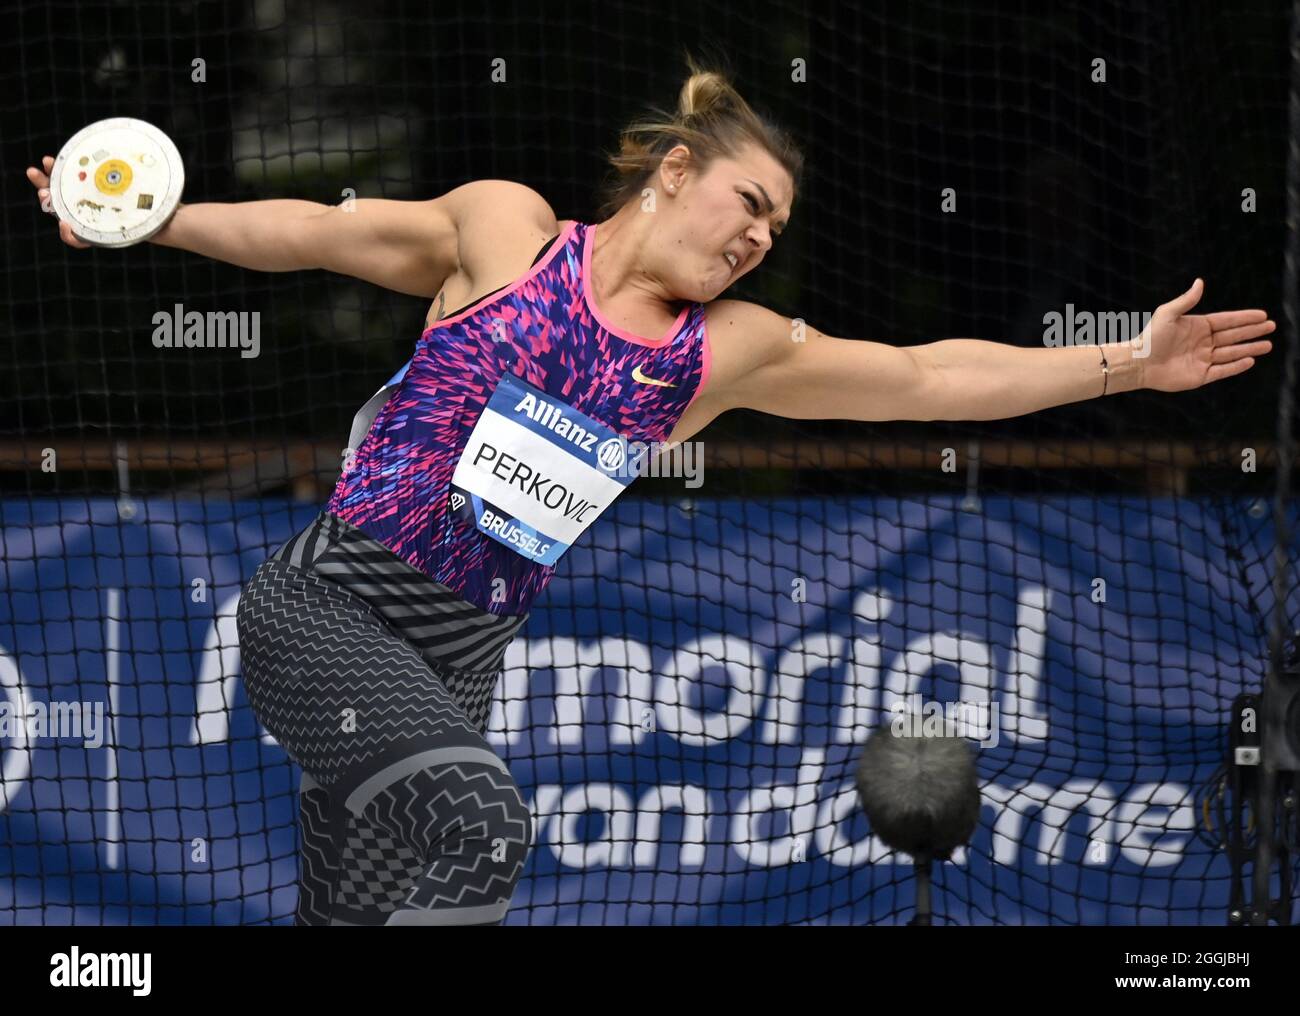 Croatian Sandra Perkovic pictured in action during the women's discus throw event, part of the 2021 edition of the Memorial Van Damme athletics meetin Stock Photo